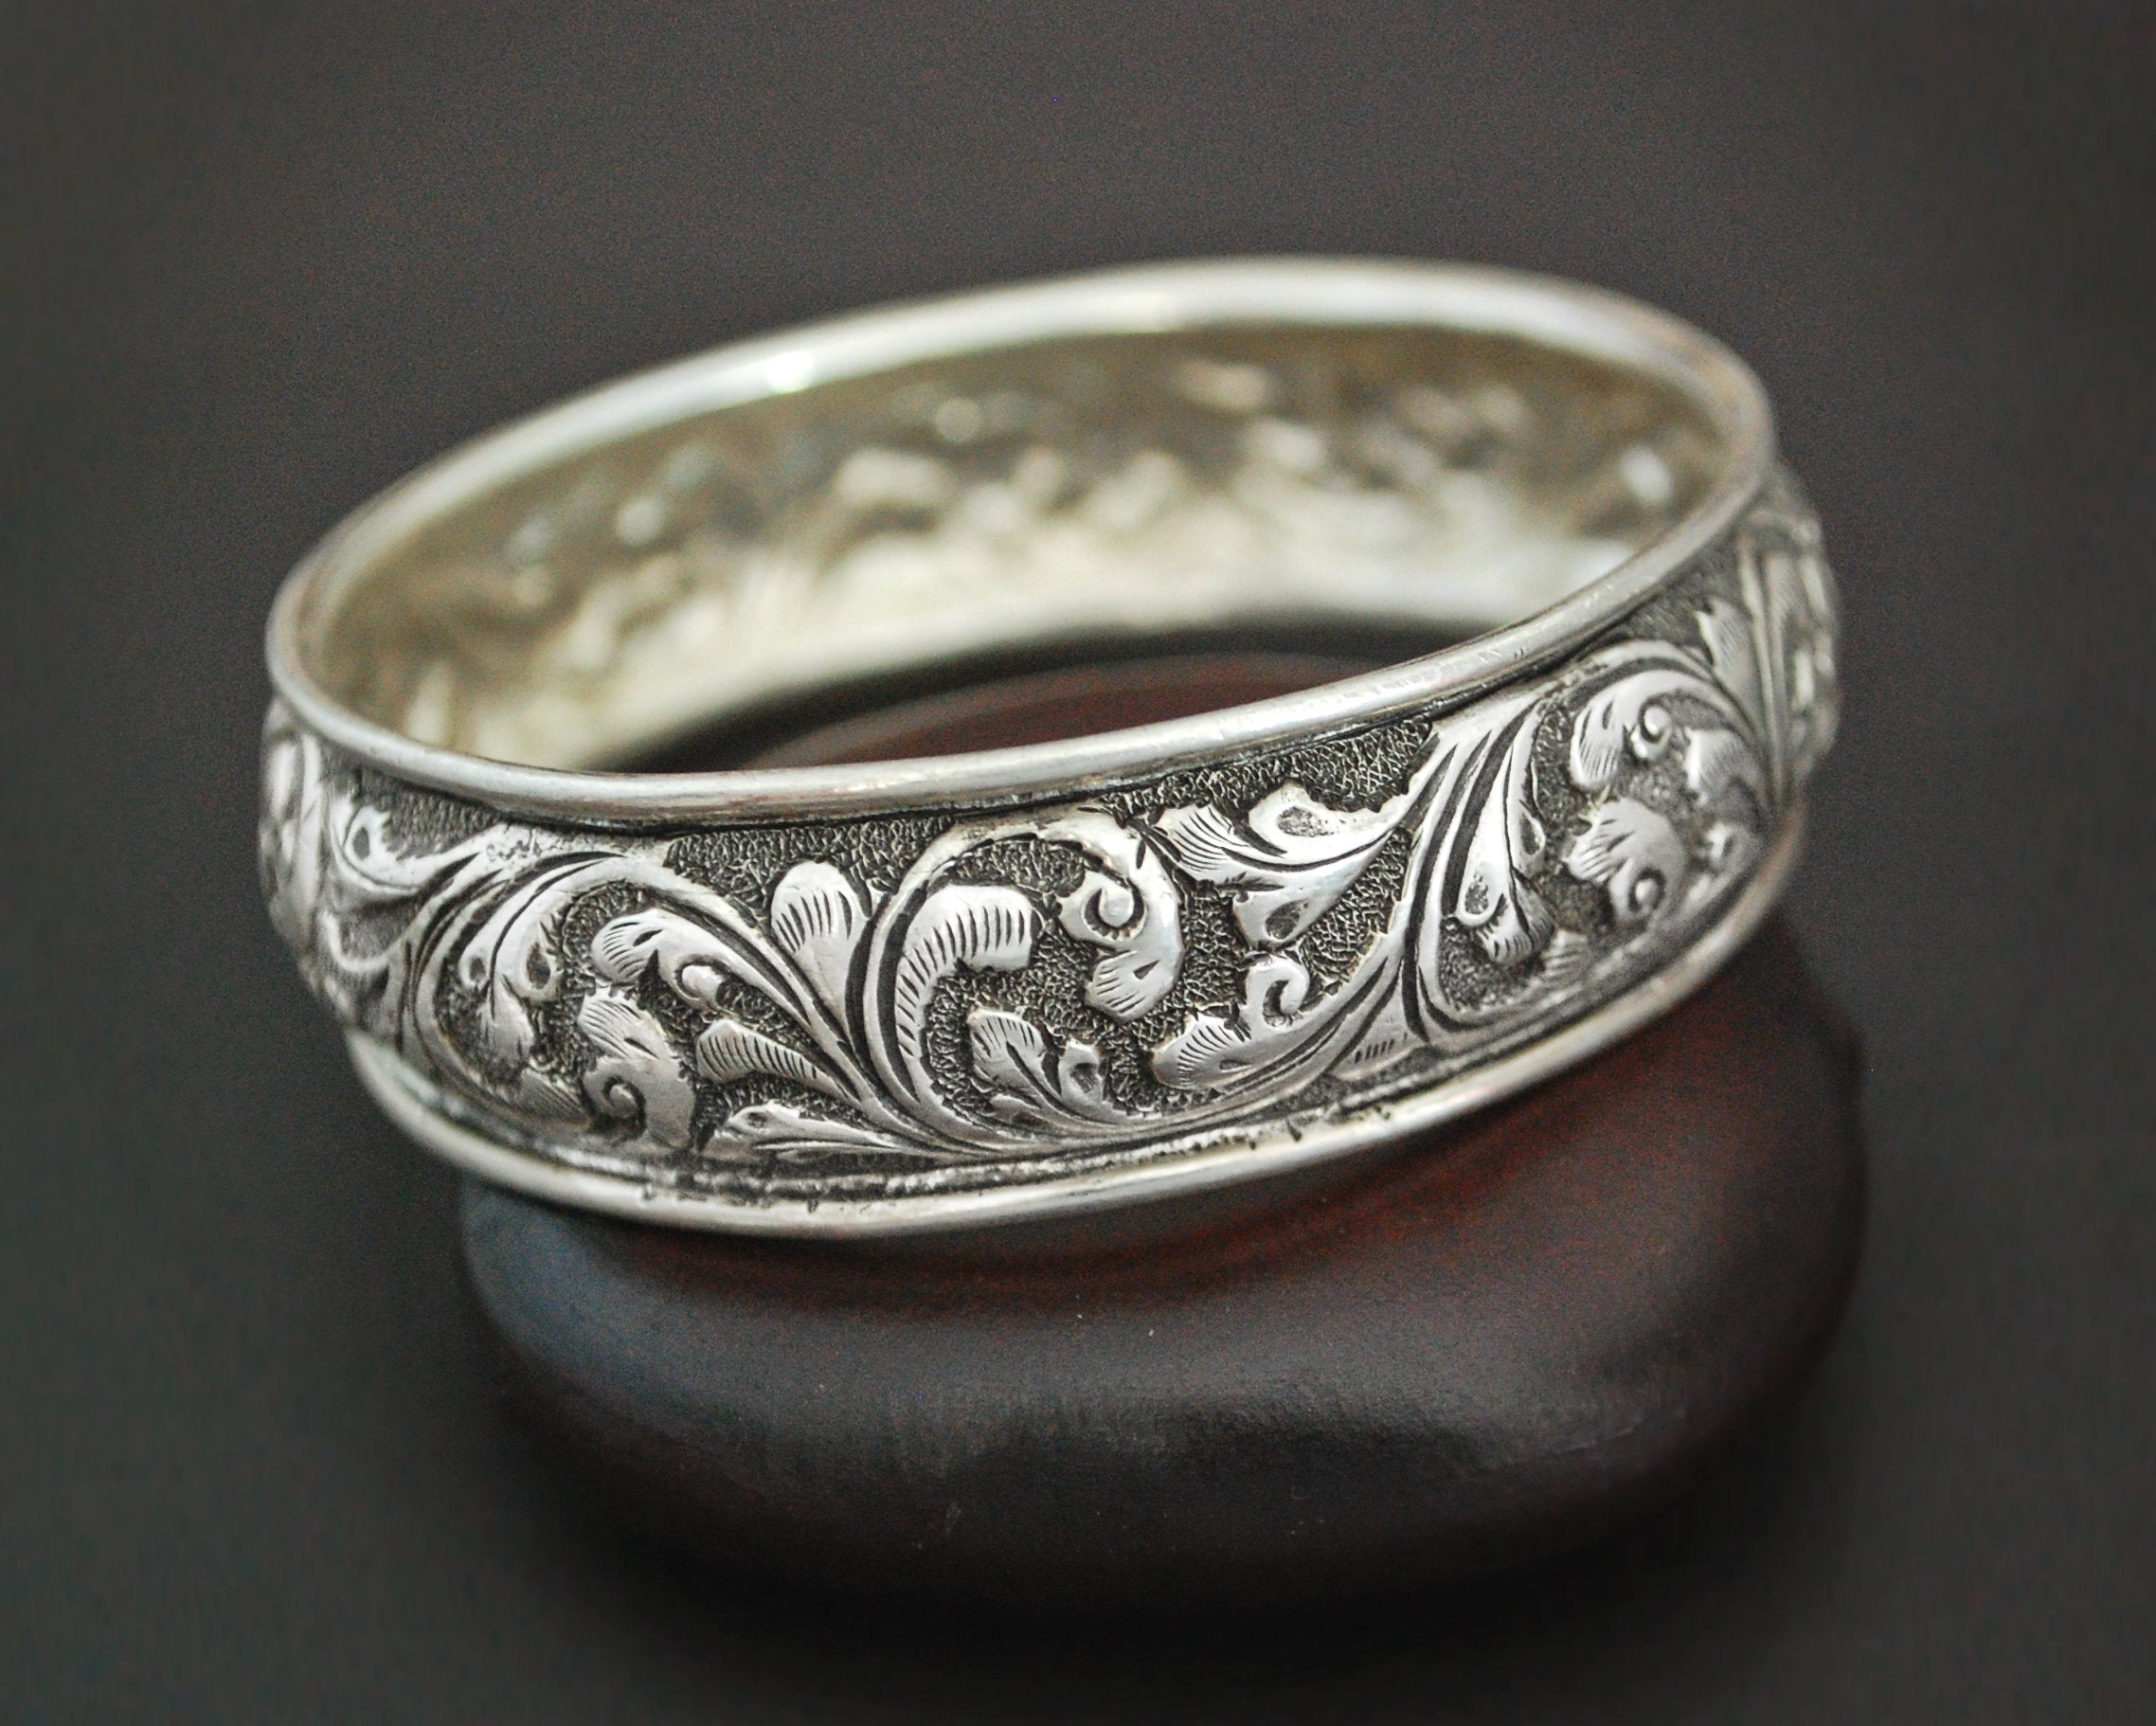 Repoussee Indian Bangle Bracelet - Sterling Silver